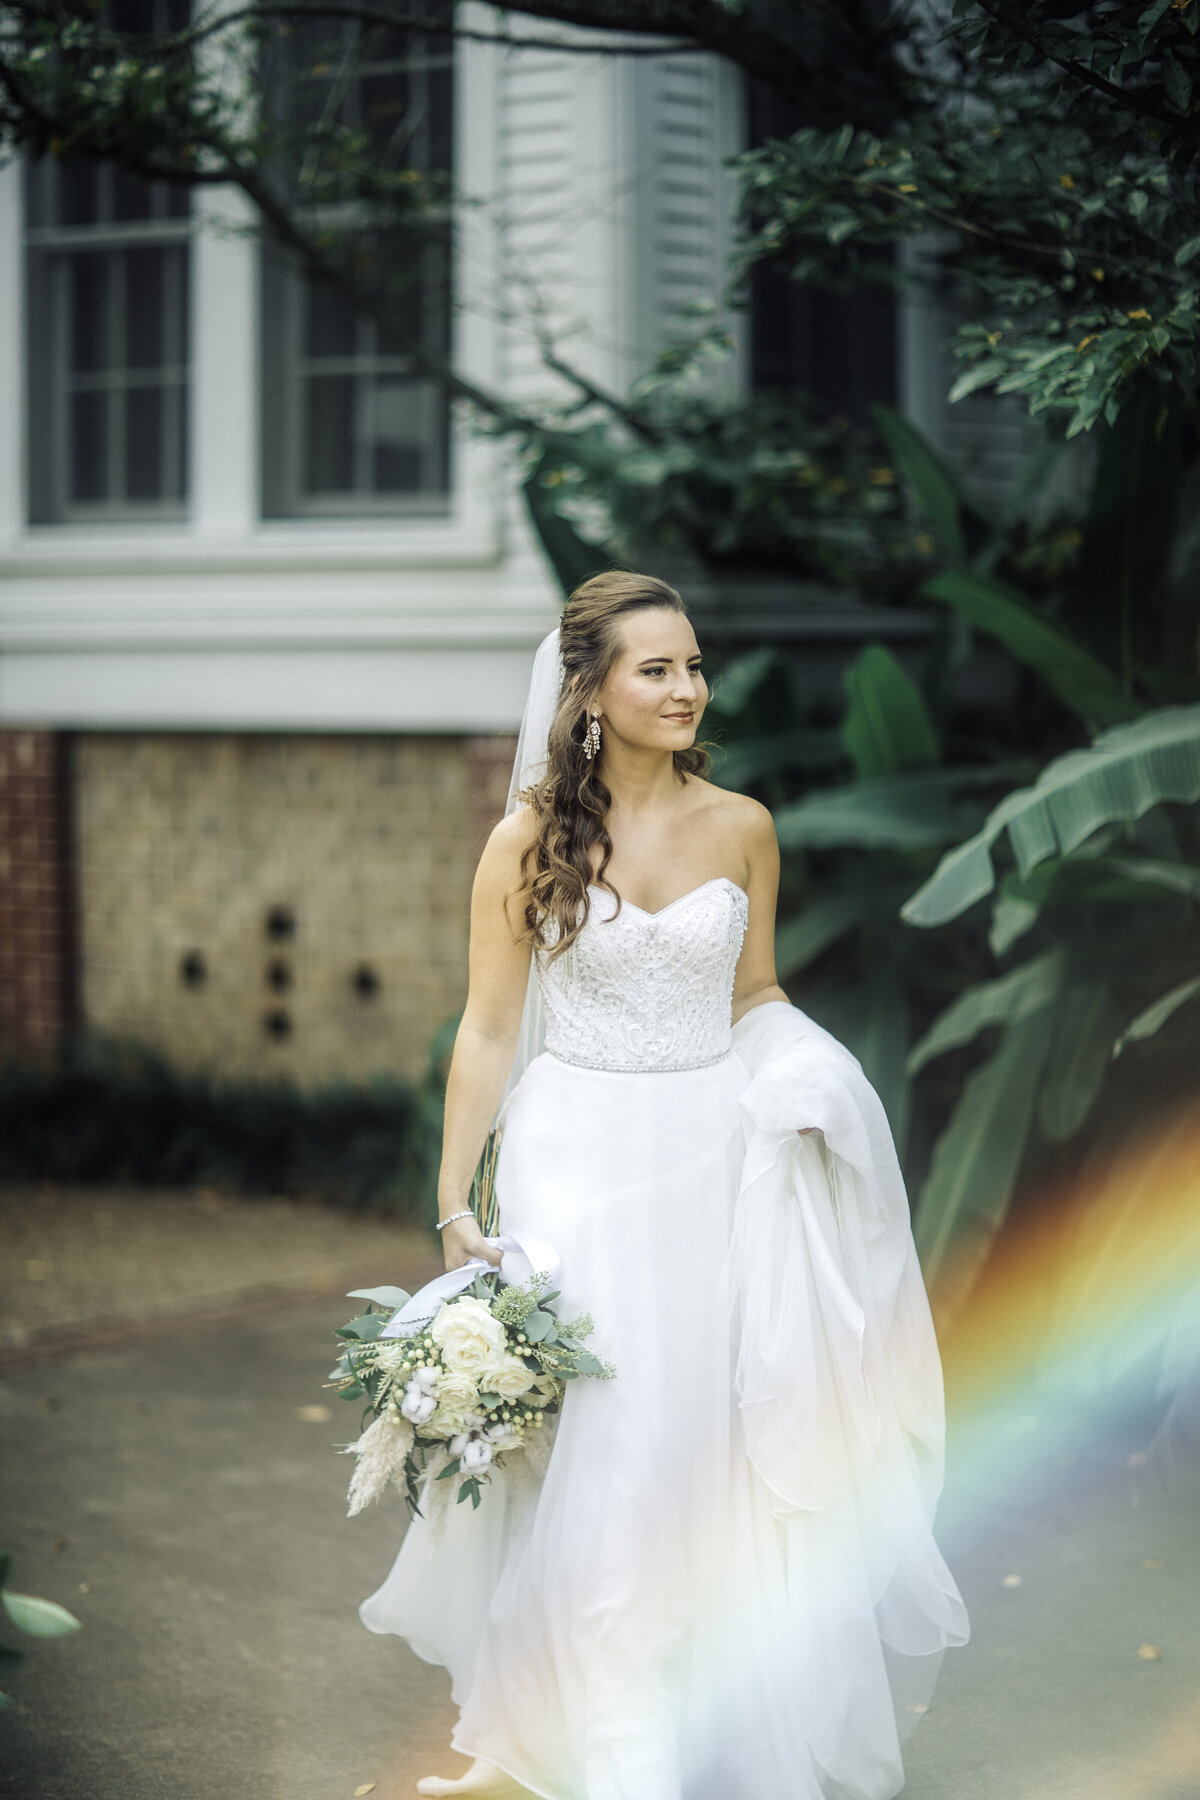 Wedding Photograph Of Bride Walking in Her White Wedding Gown Los Angeles